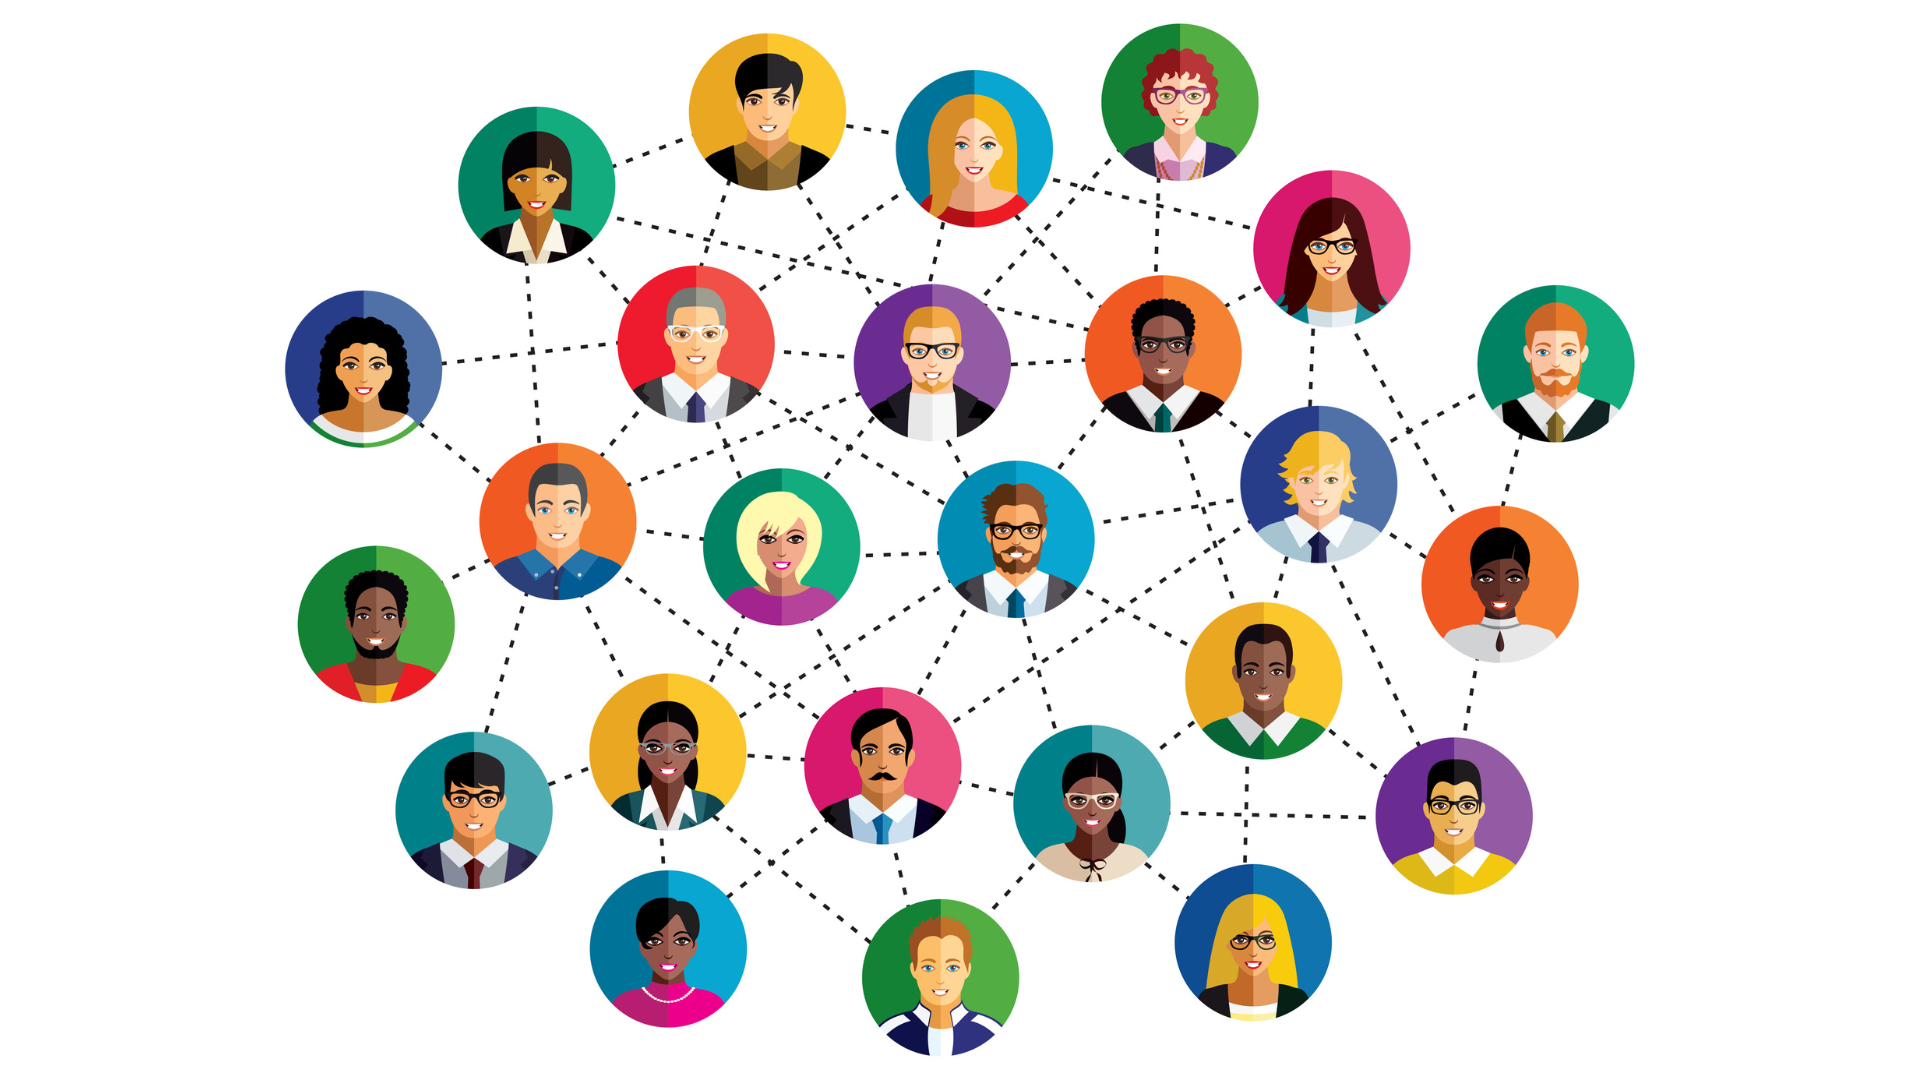 Intranets and Internal Social Networks: They Were Made For Each Other